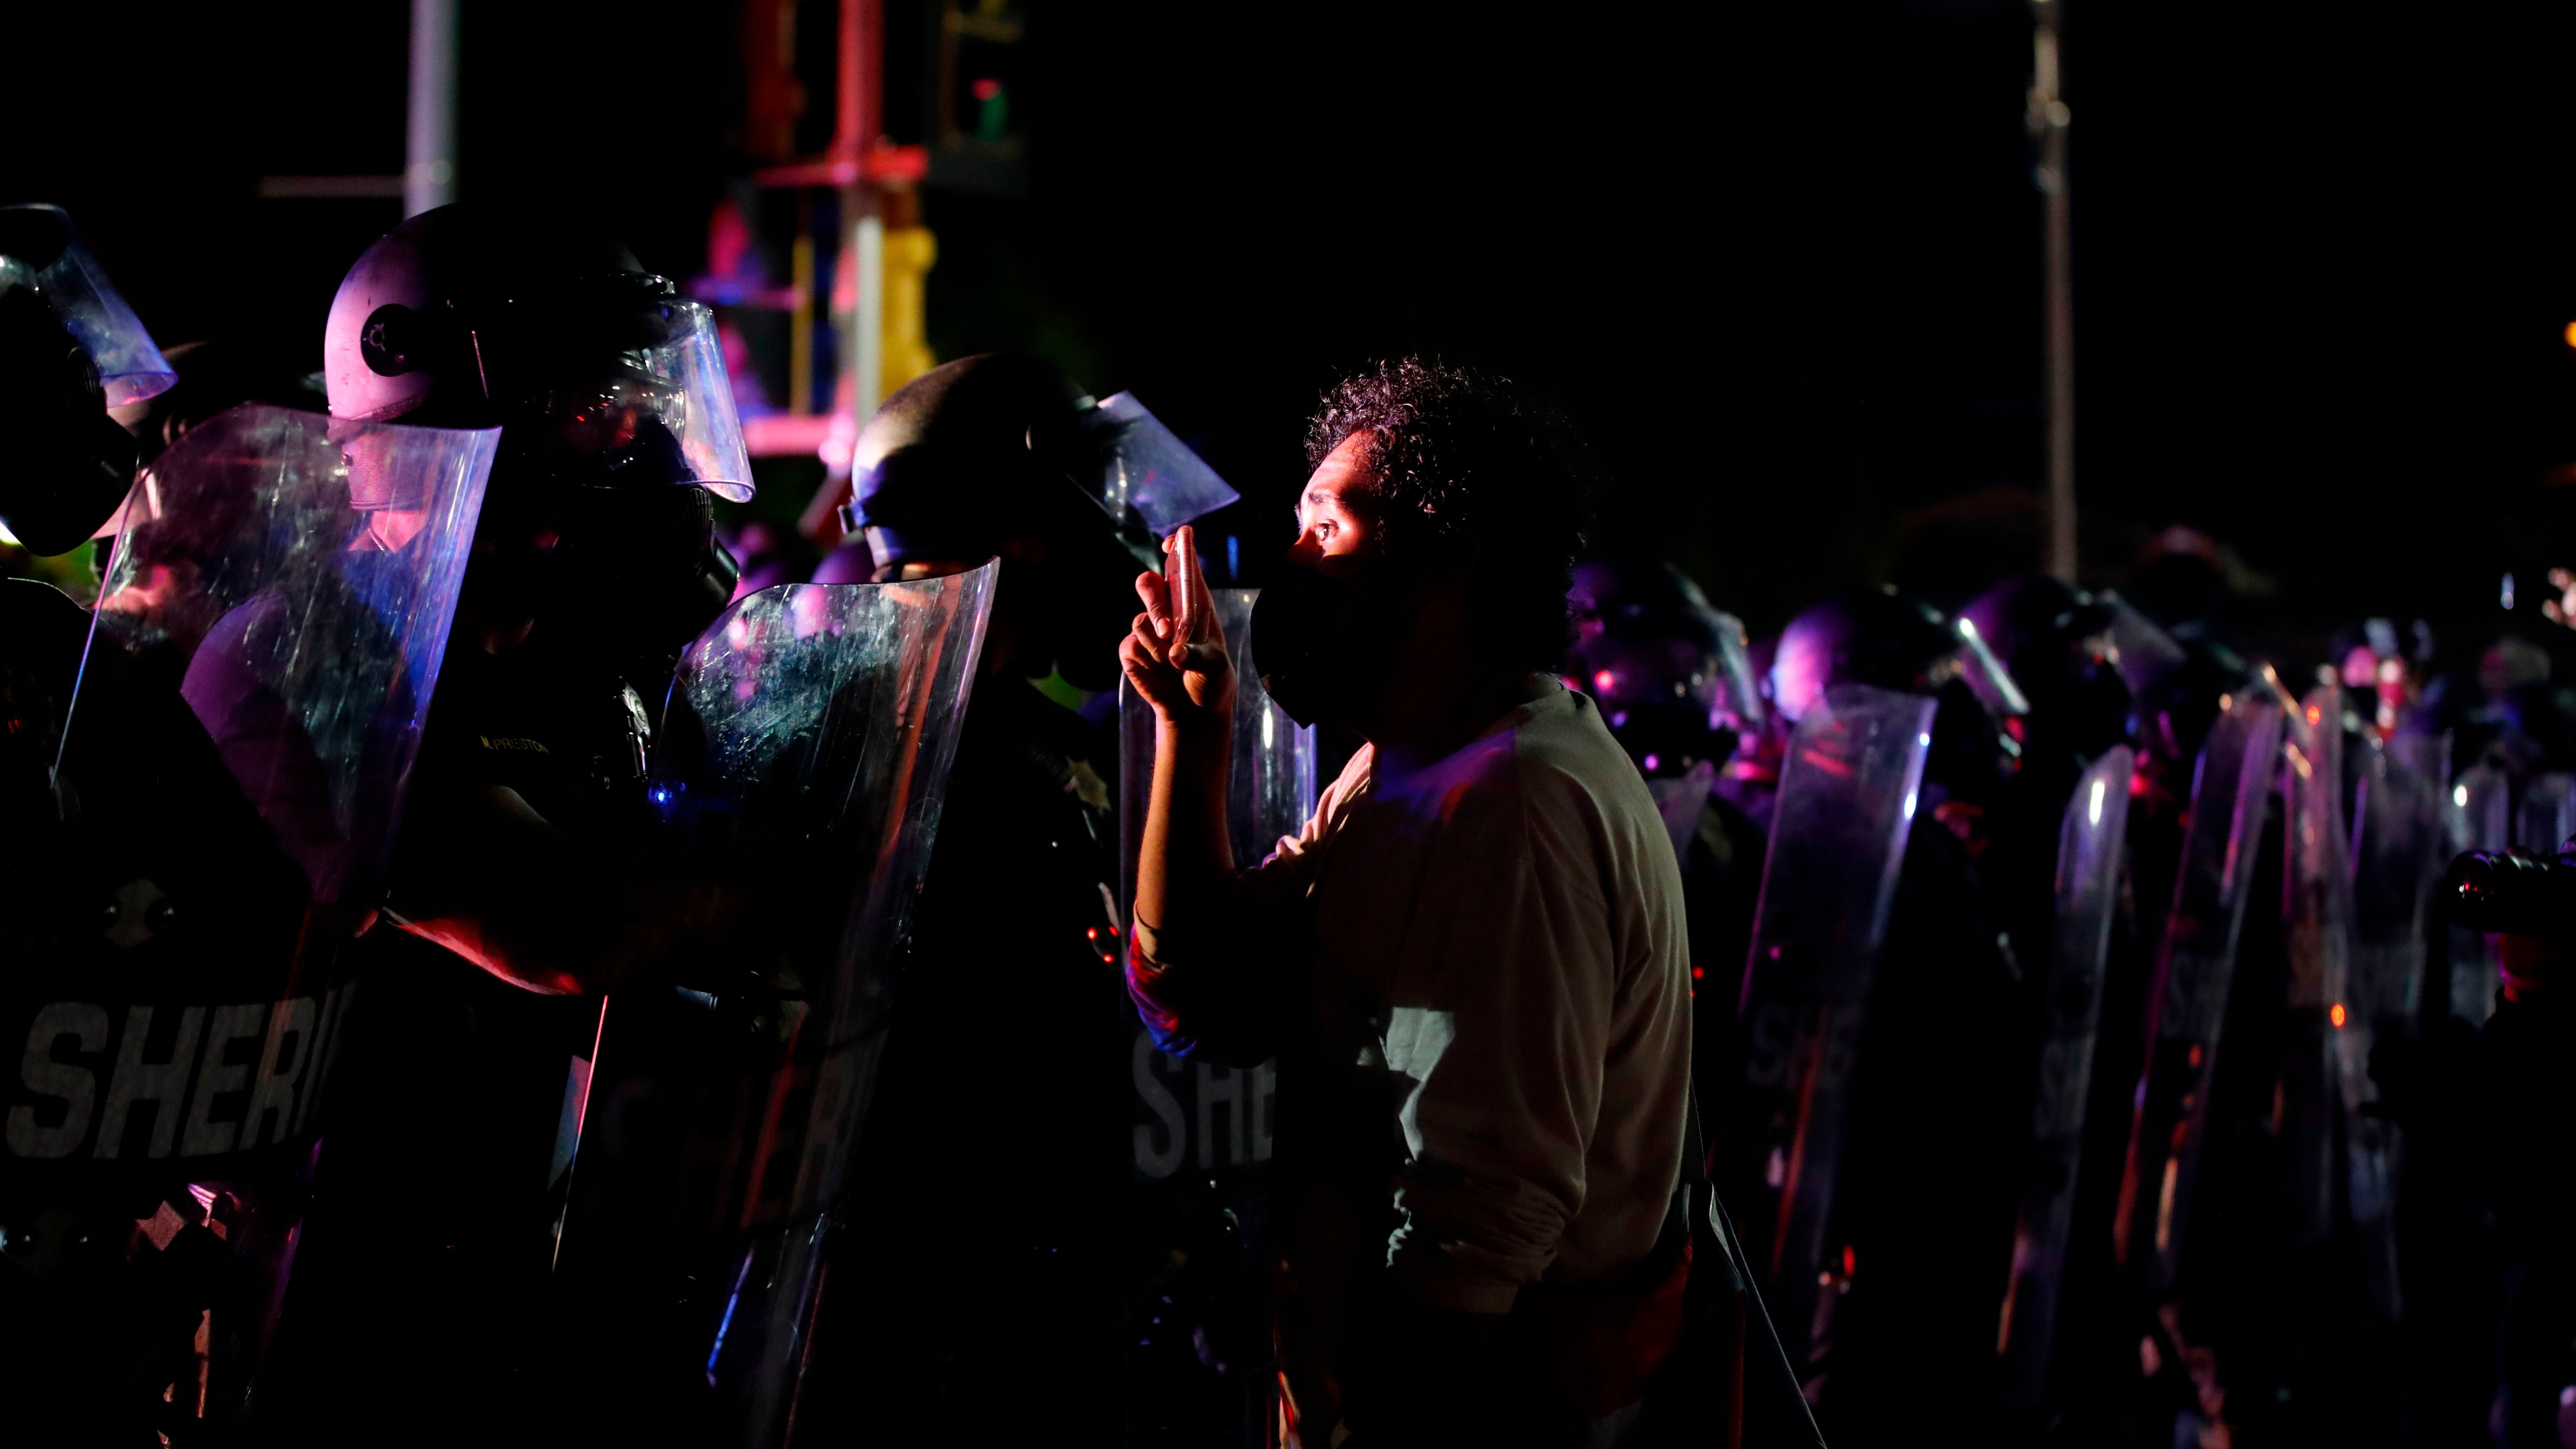 A protester stands face to face with police during demonstrations against the shooting of Jacob Blake in Kenosha, Wis., on August 25, 2020.